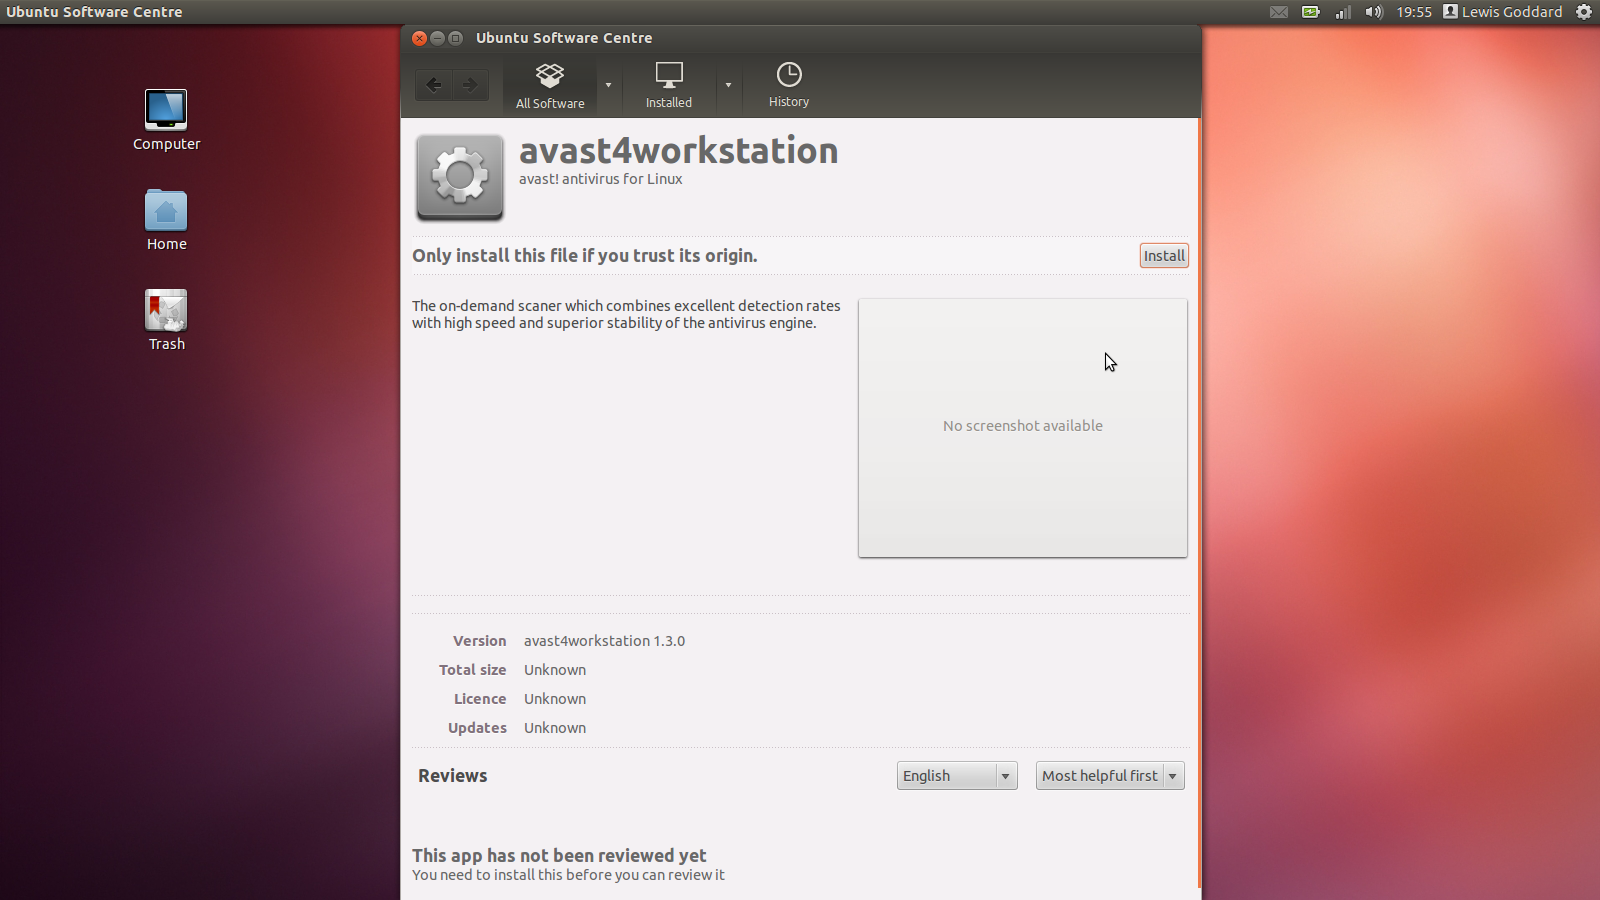 Install avast! Free Antivirus Linux Home Edition with the Ubuntu Software Centre